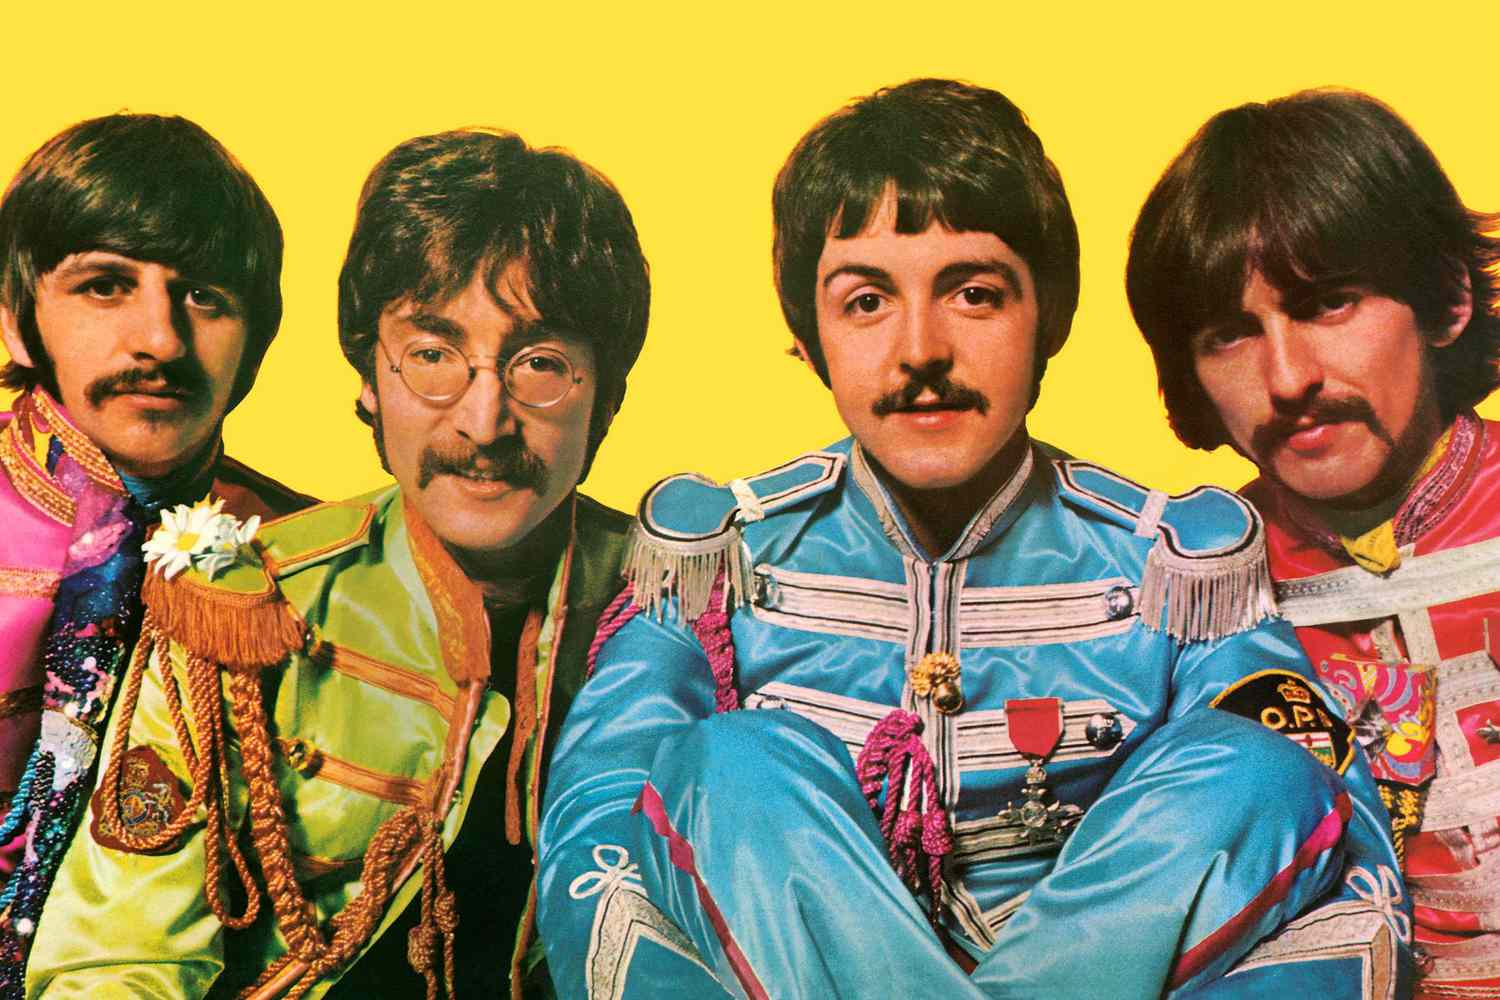 30-facts-about-sgt-peppers-lonely-hearts-club-band